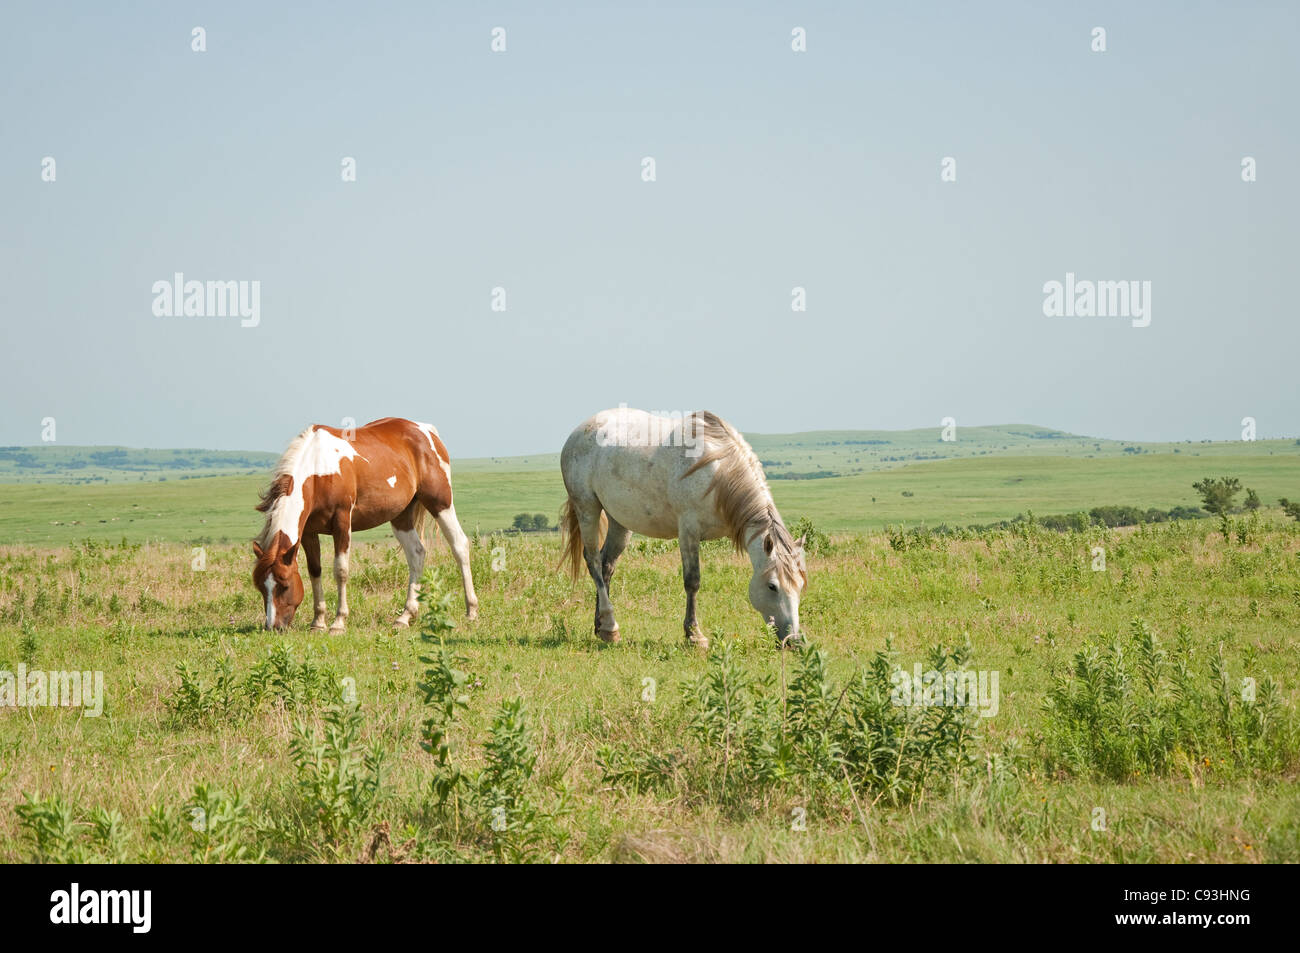 Two horses grazing against vast wide open prairie background Stock Photo